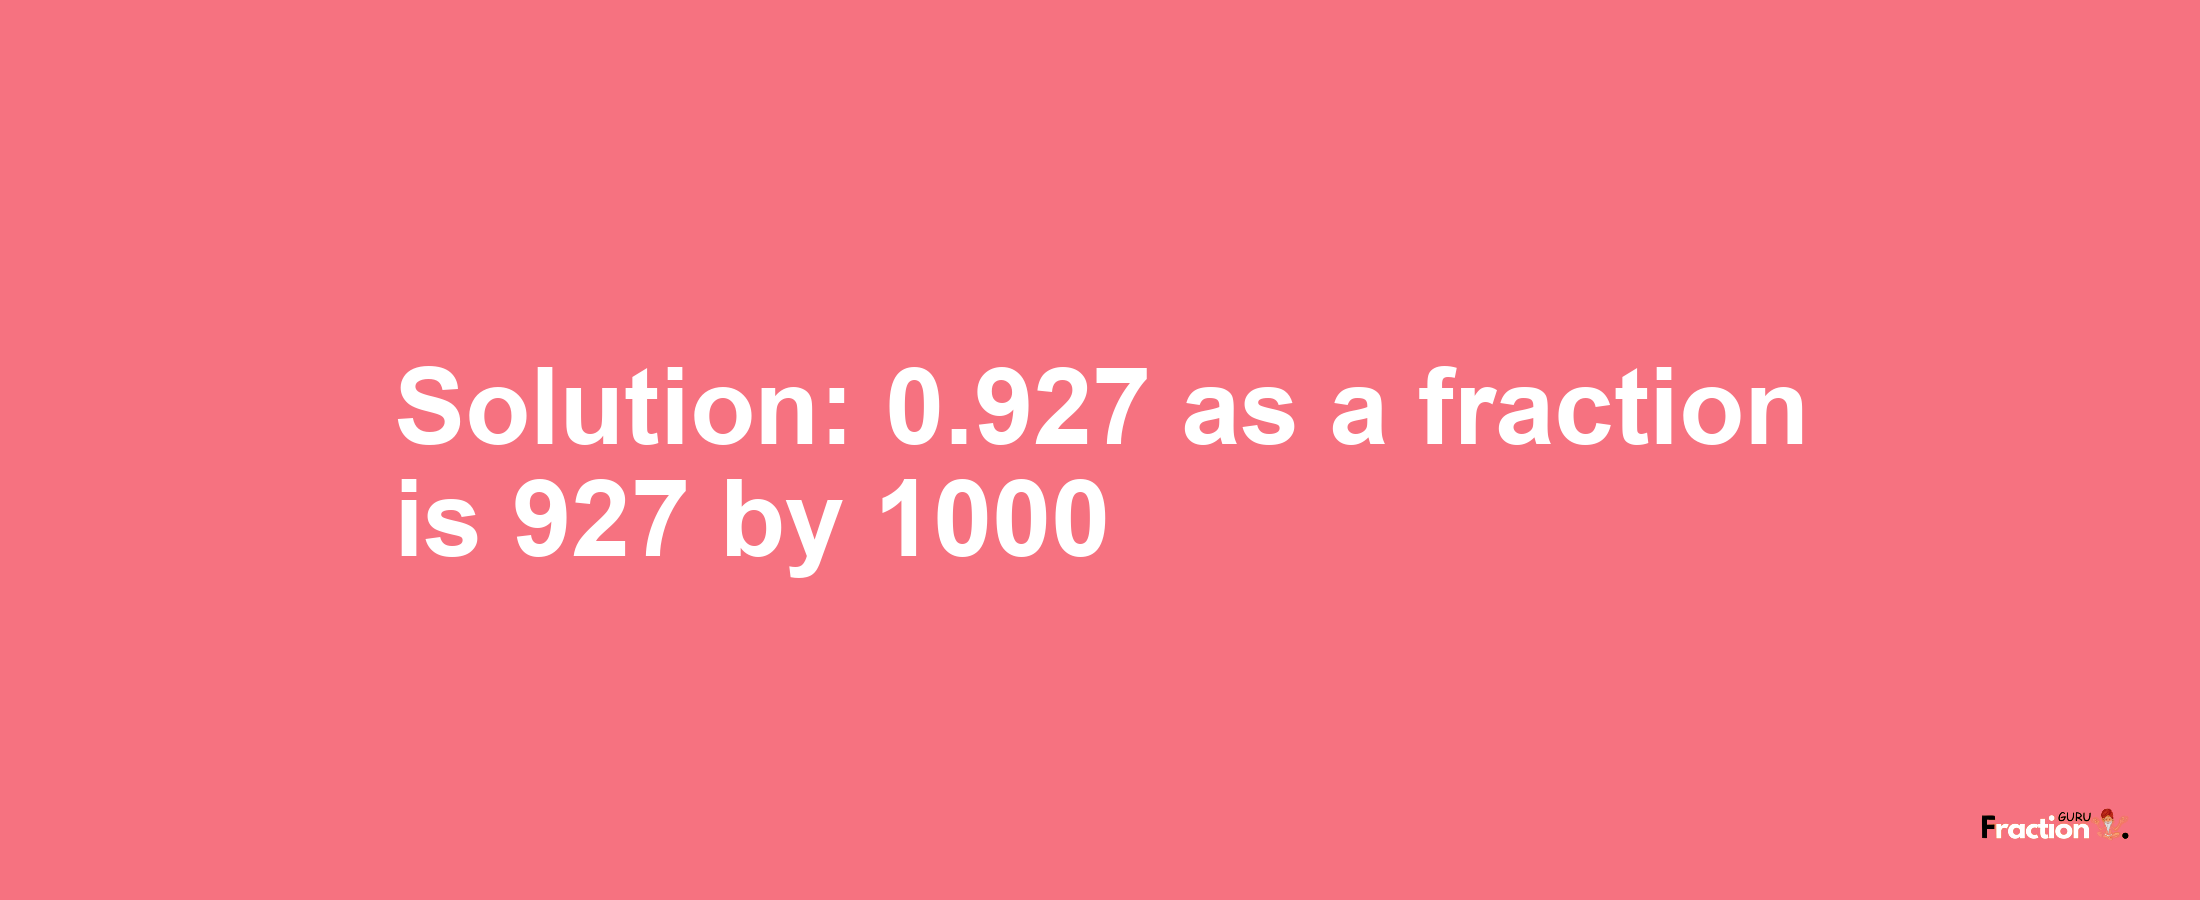 Solution:0.927 as a fraction is 927/1000